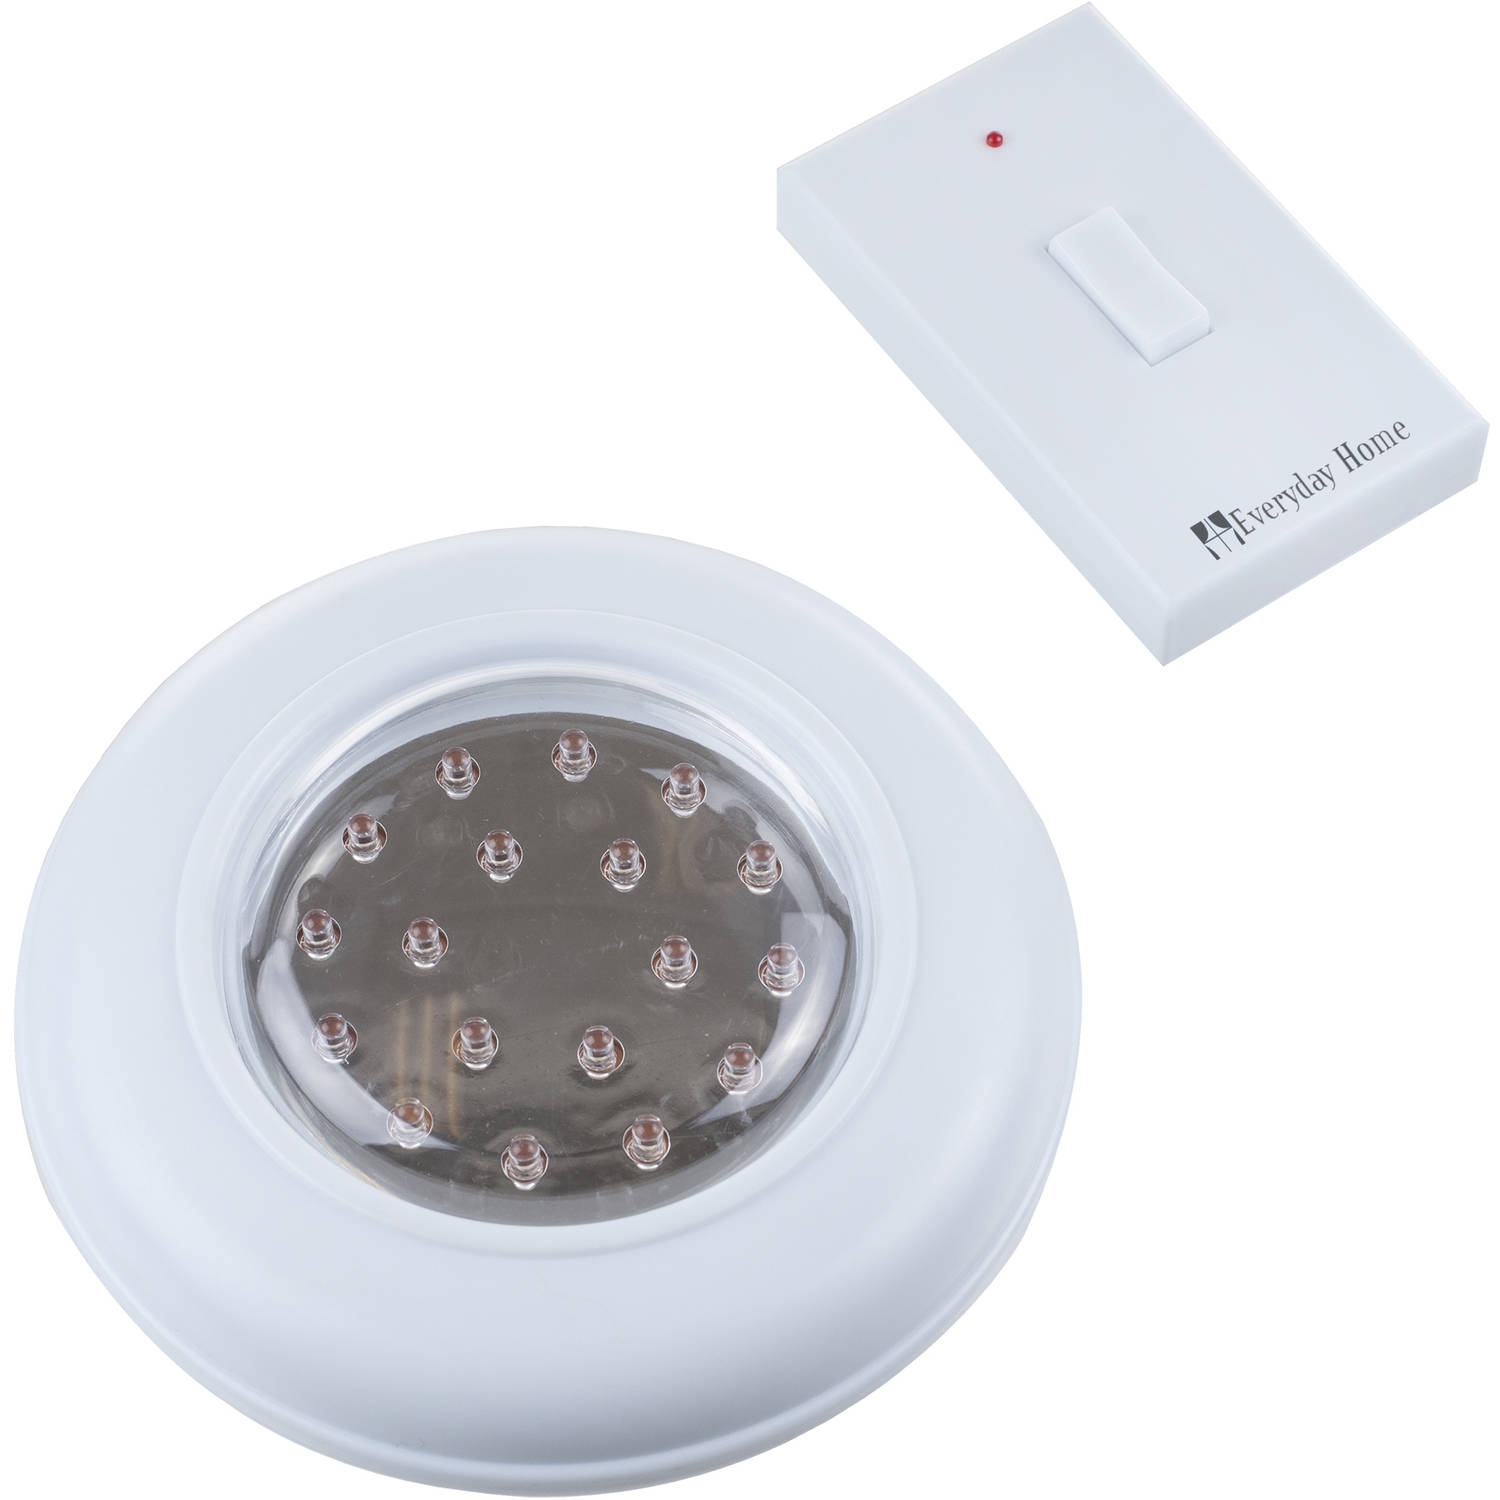 Cordless Electric Ceiling Light With Remote1500 X 1500